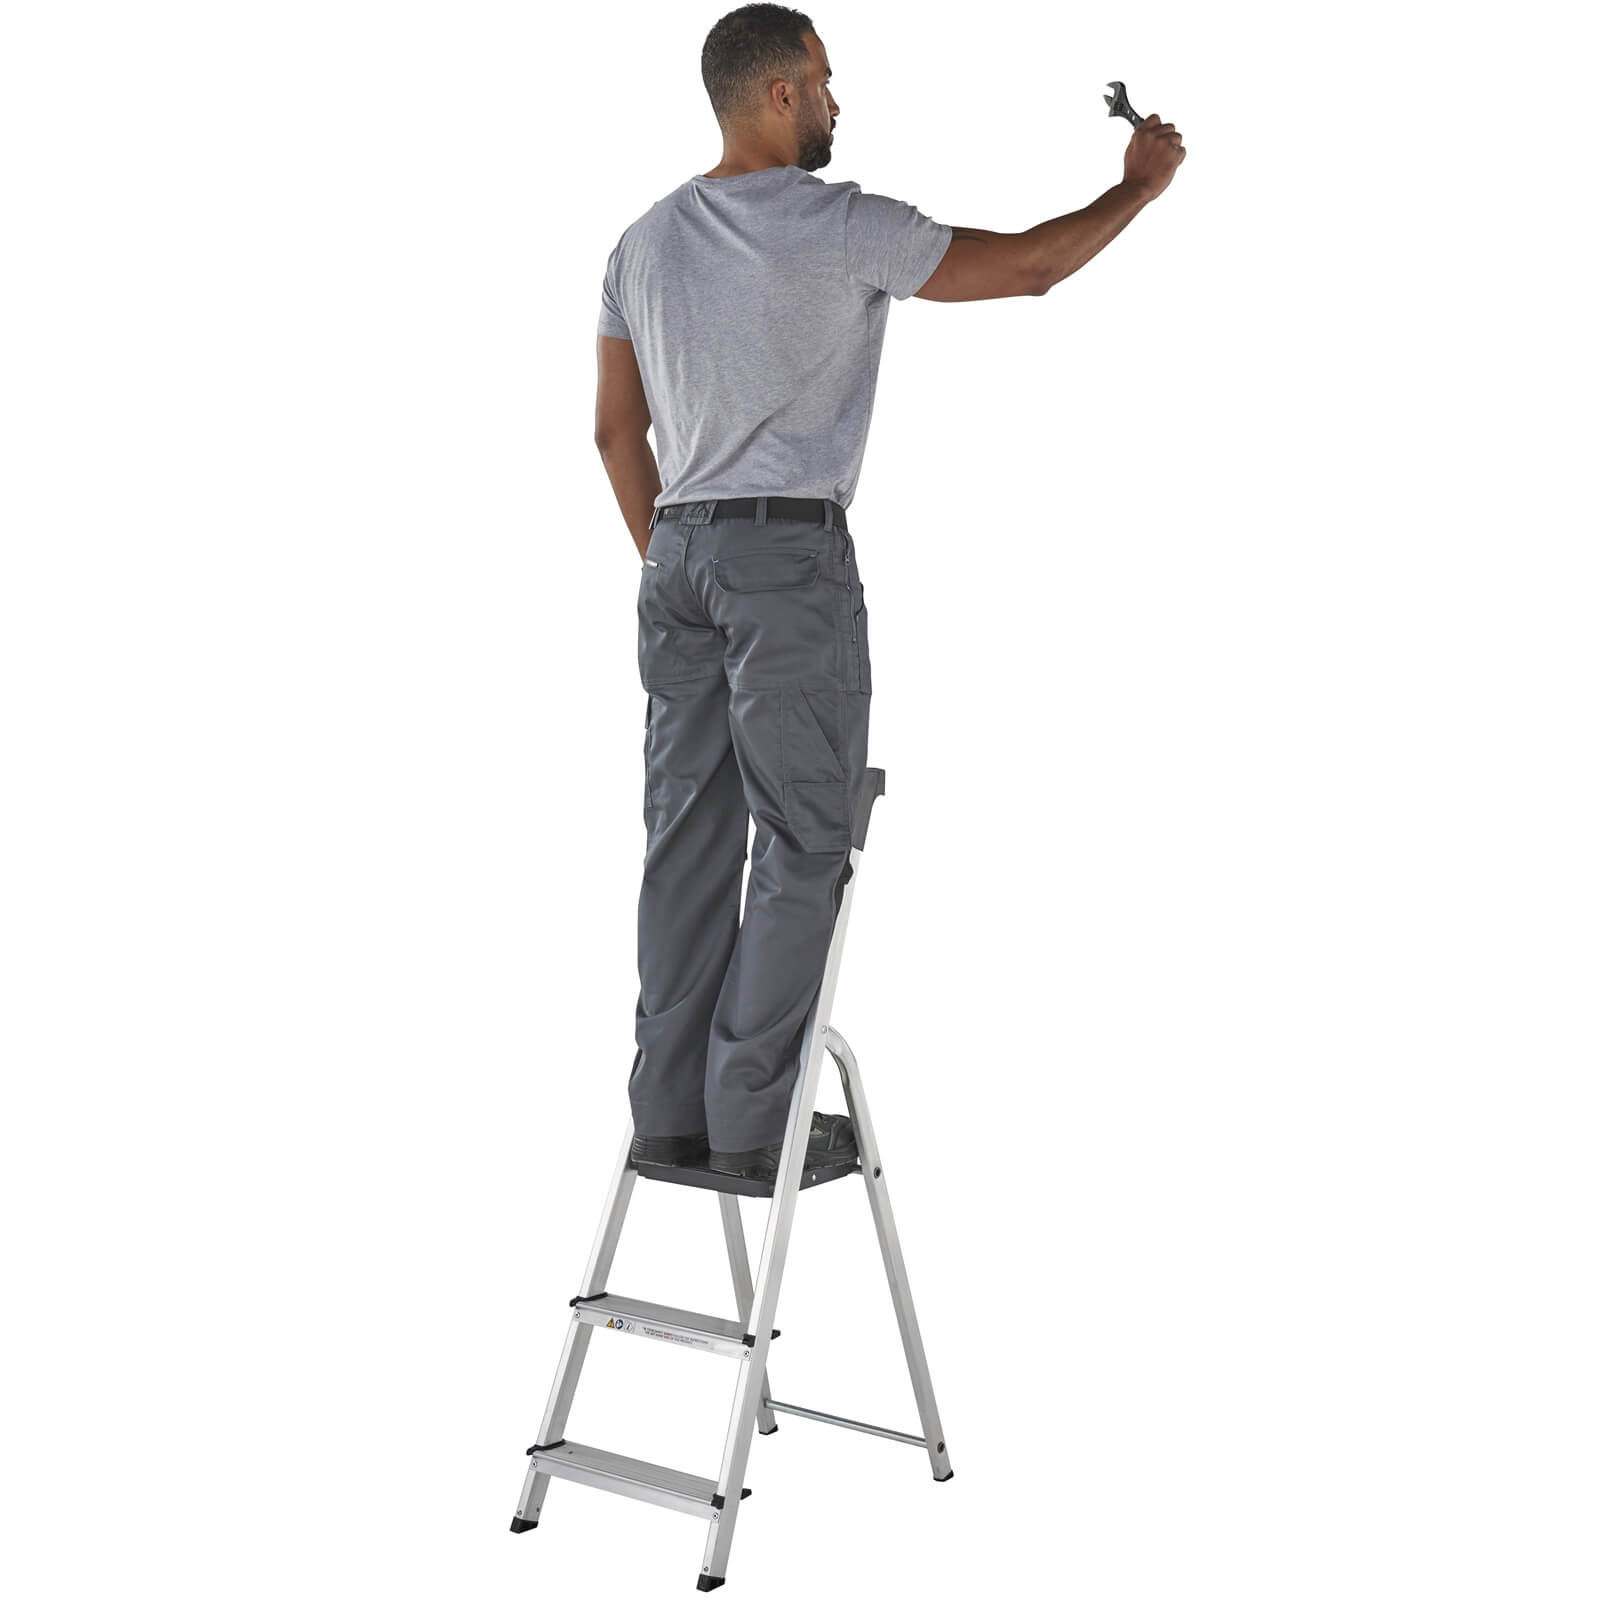 Werner High Handrail Step Ladder with Tool Tray - 3 Tread